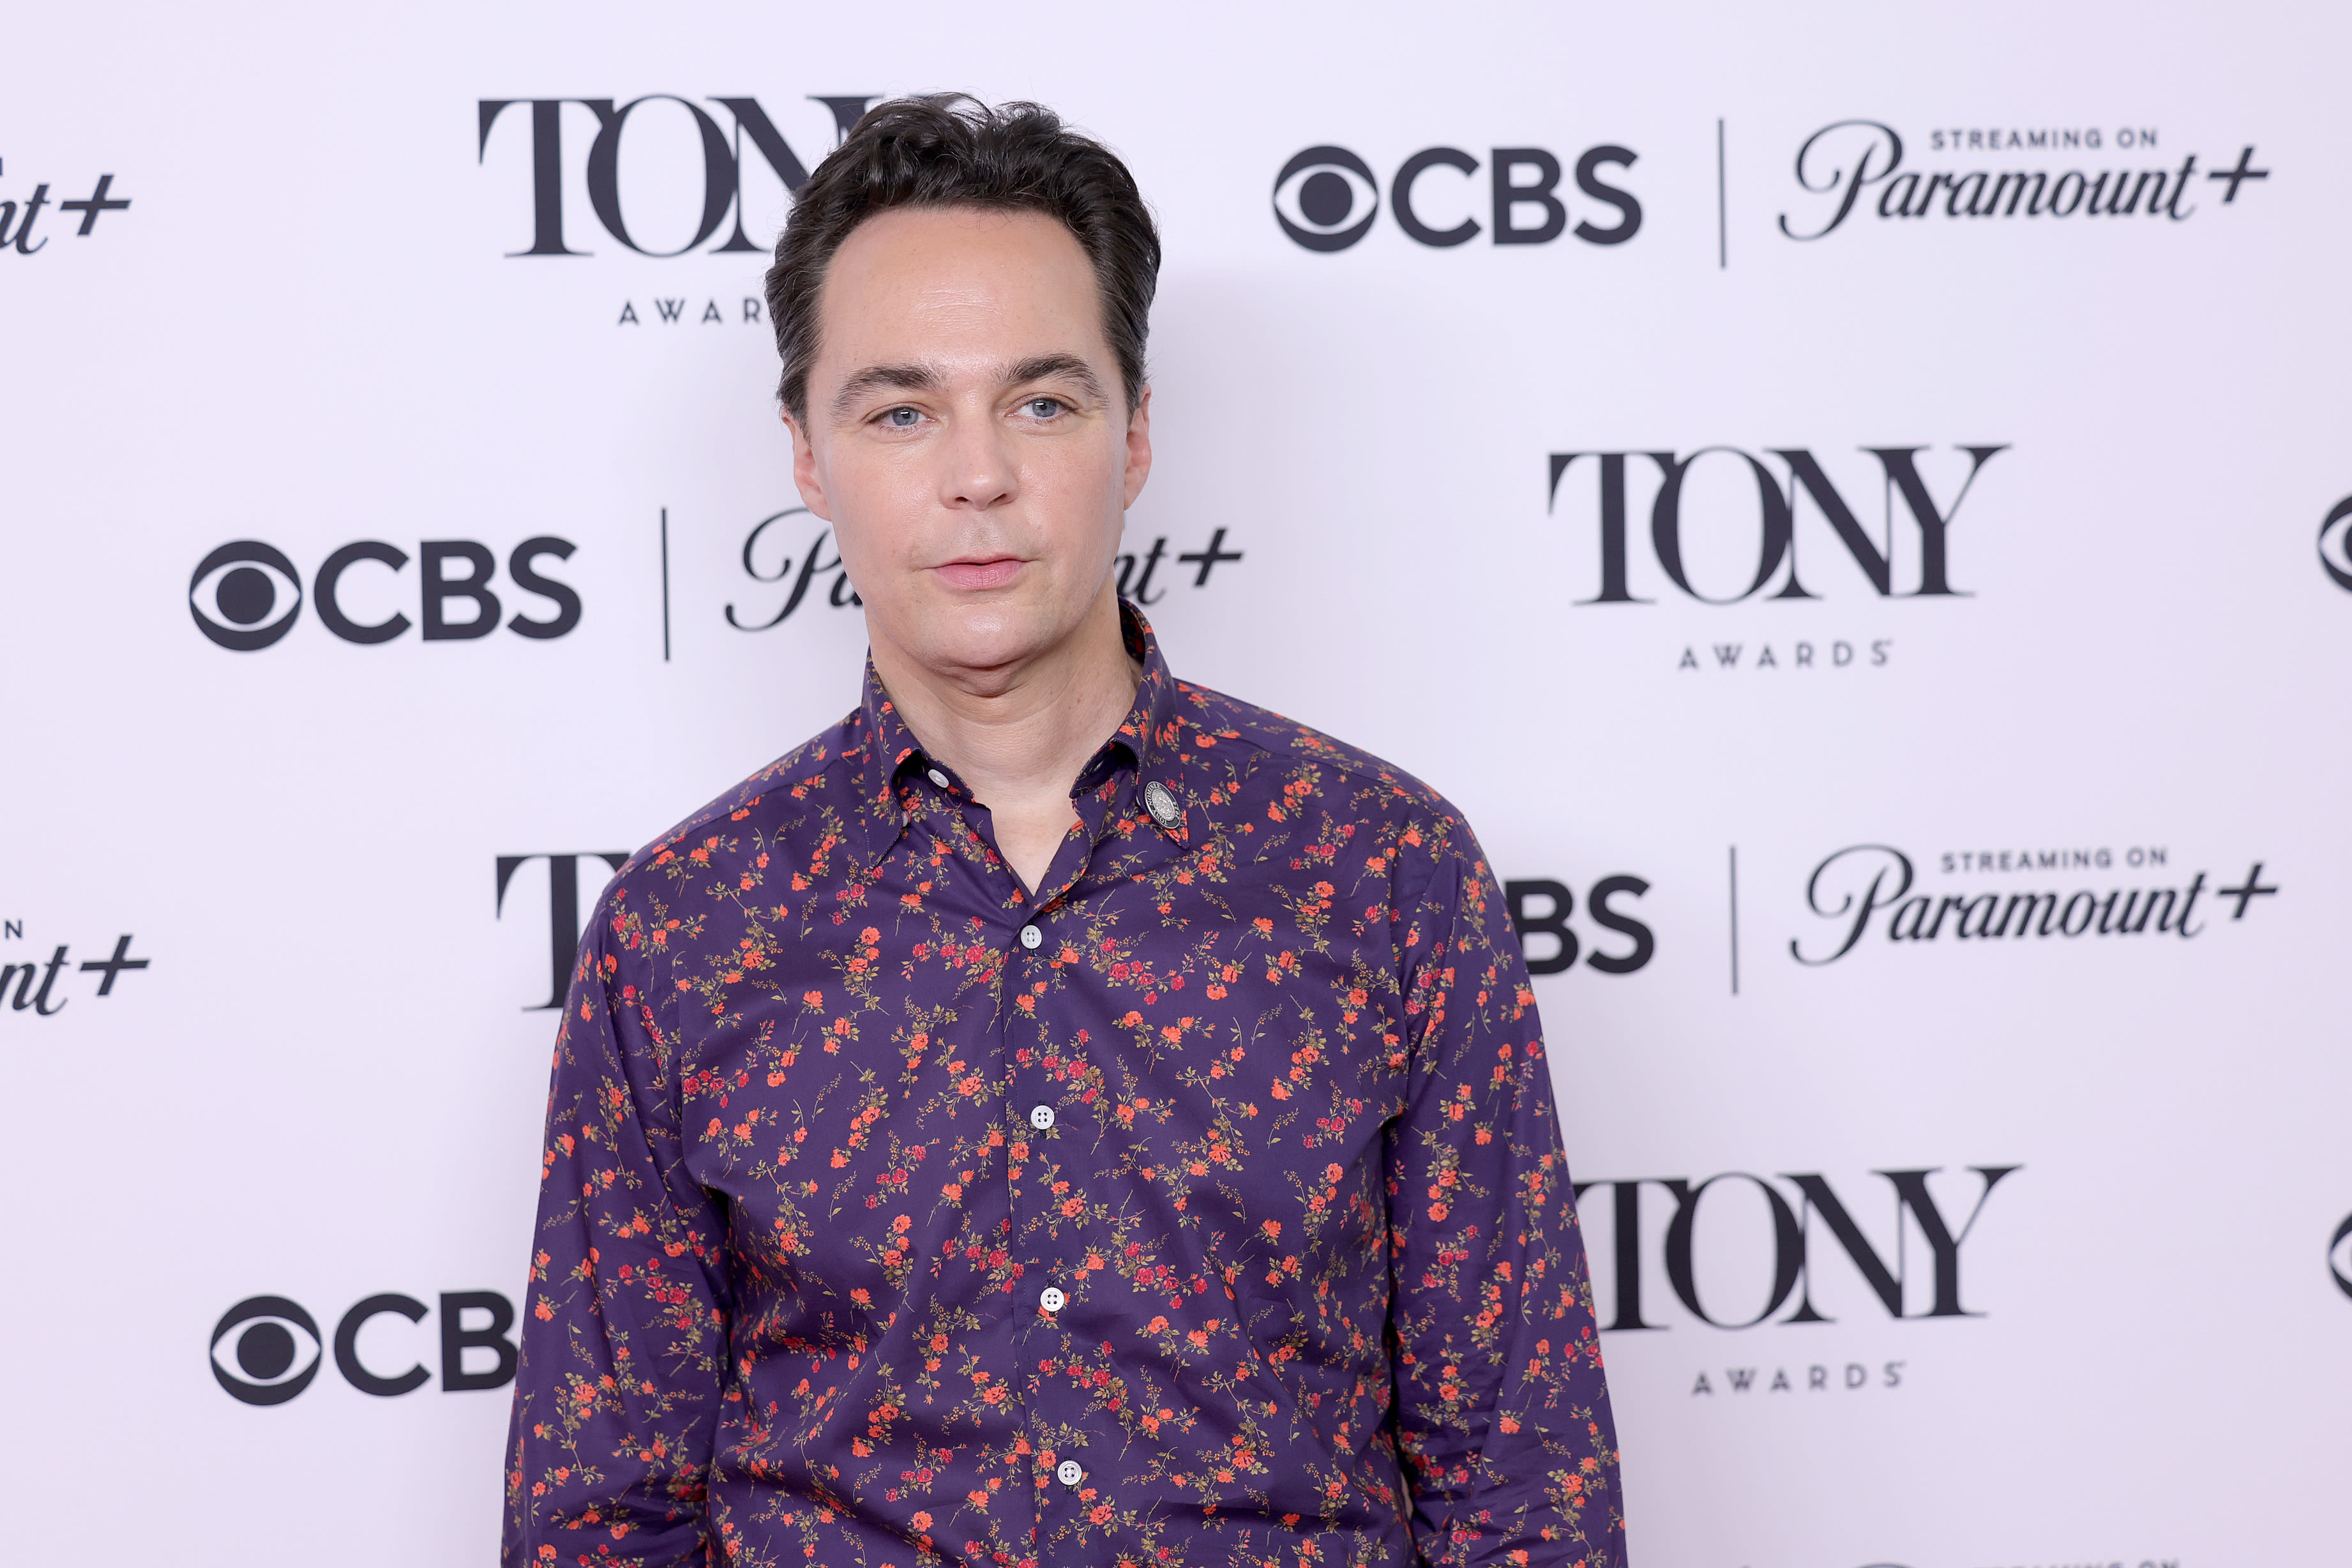 Jim Parsons talks about reprising role as Sheldon and first Tony nomination